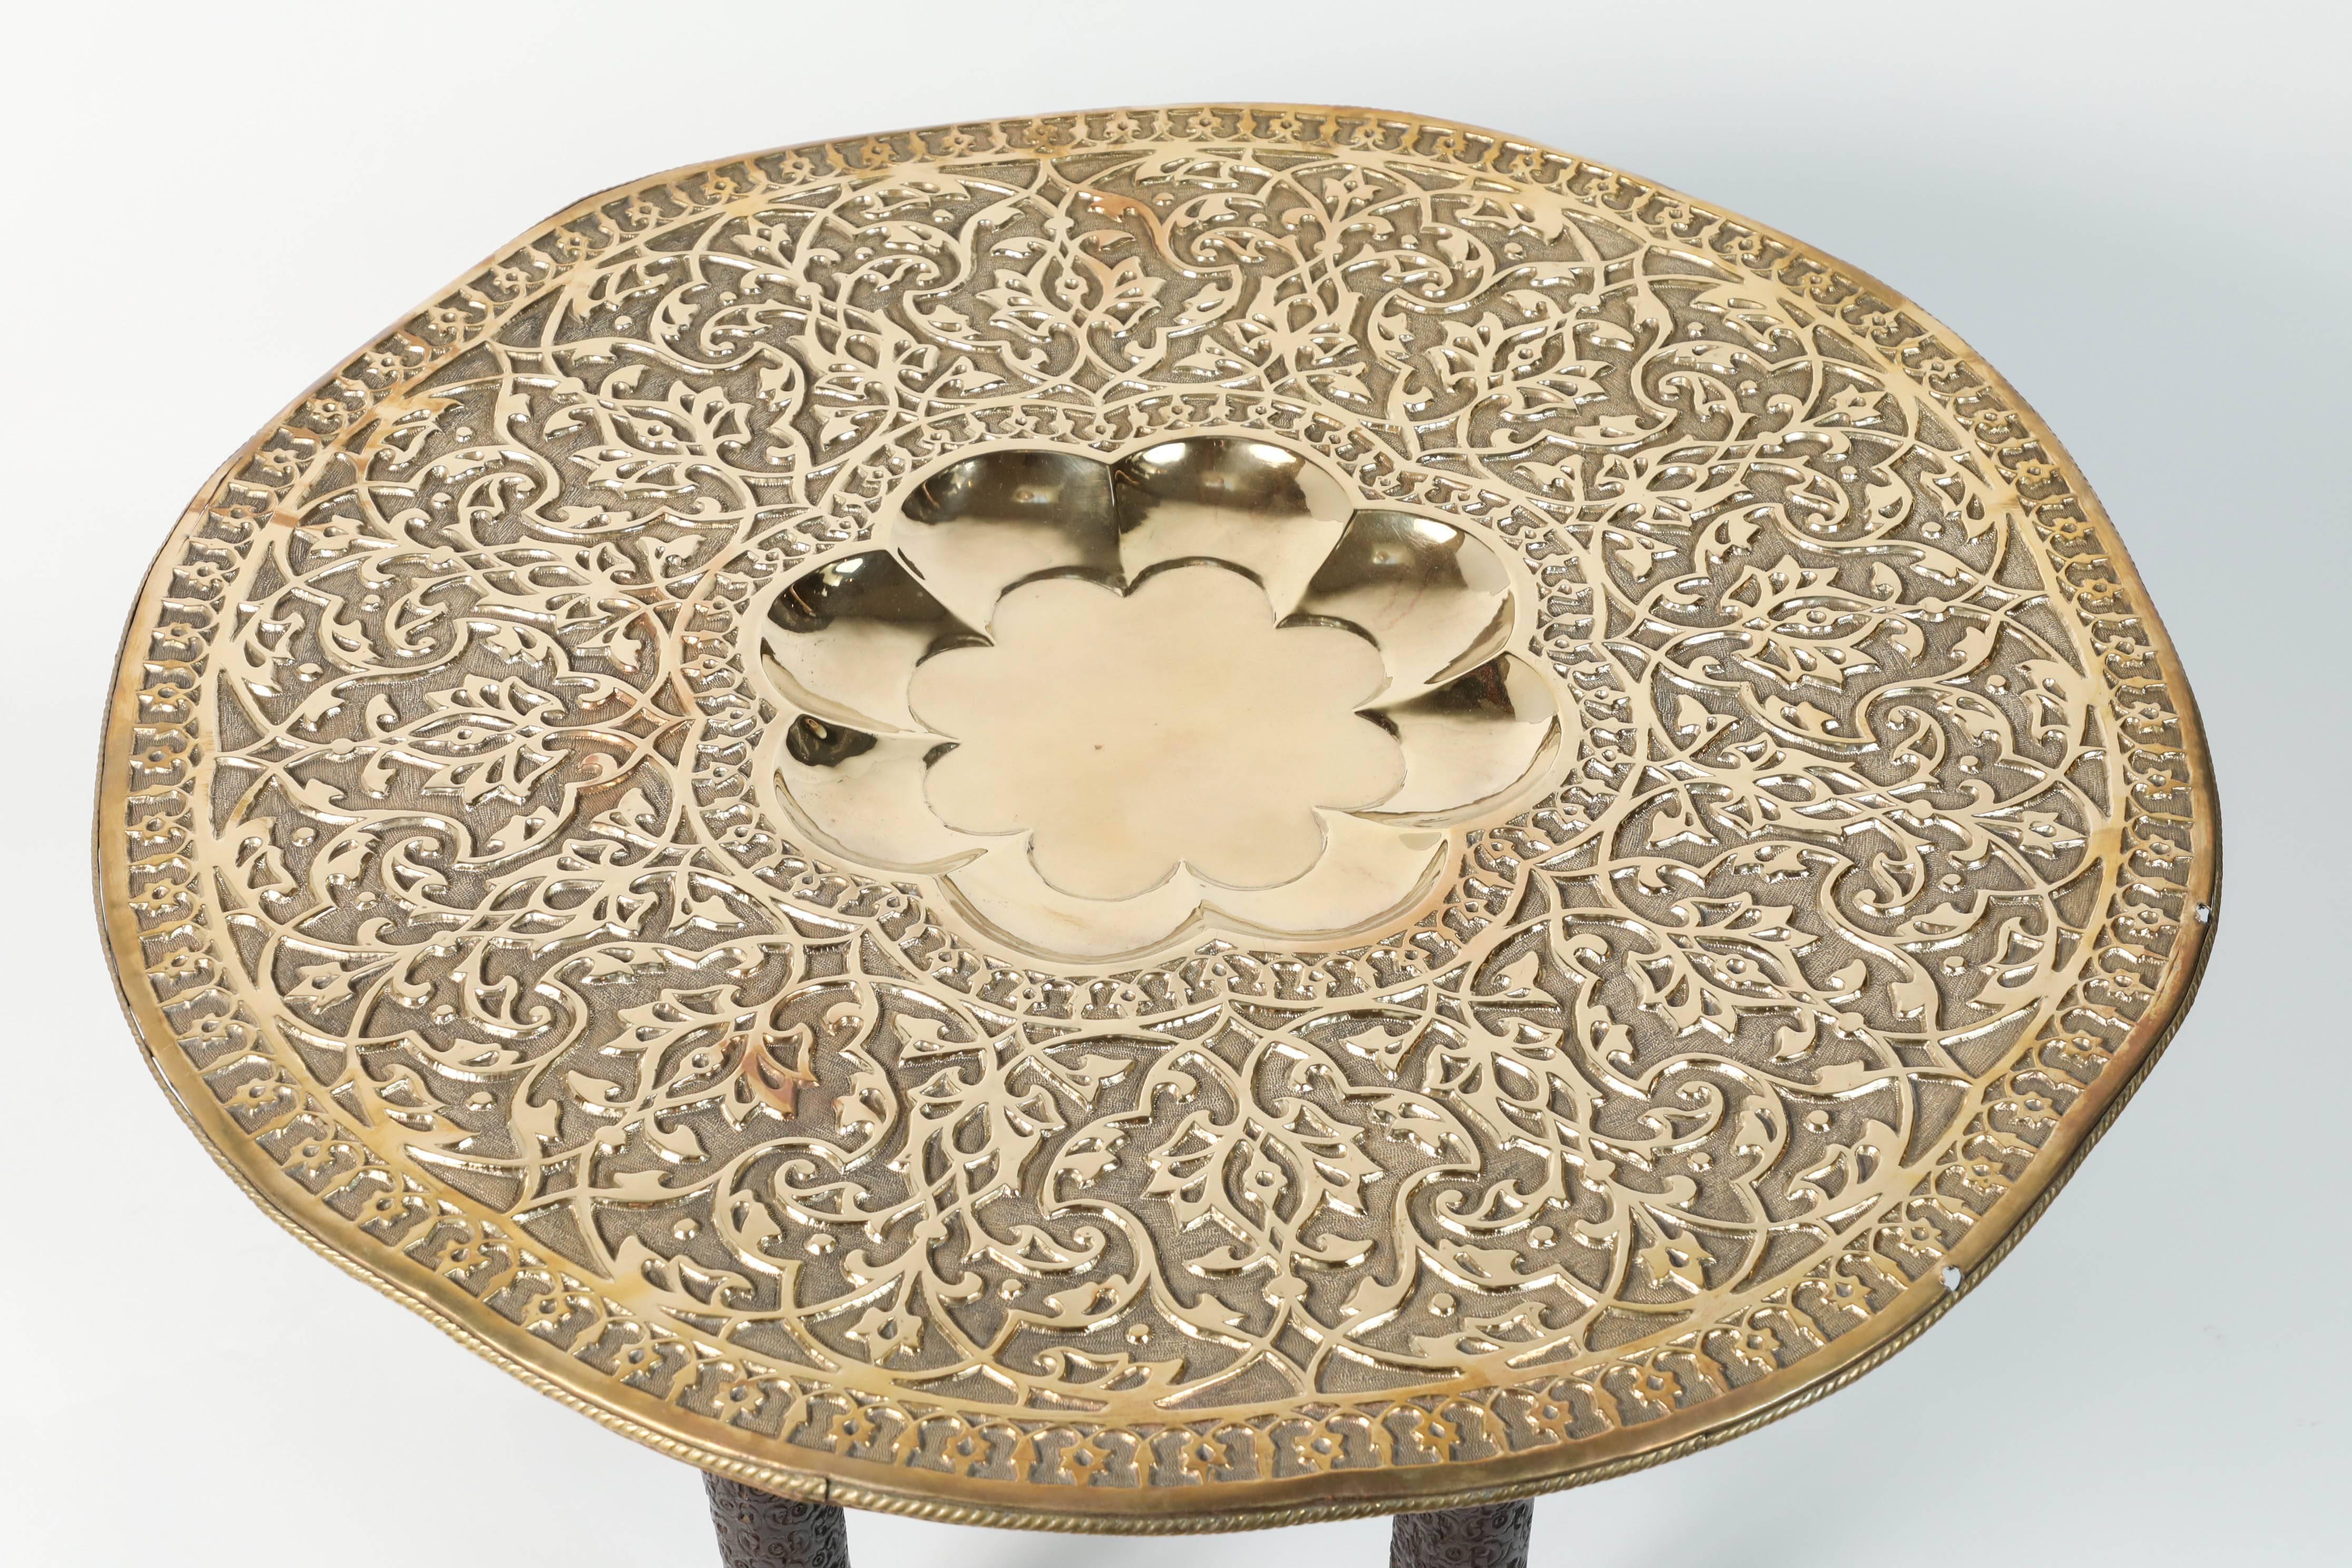 Mughal Empire antique brass tray table with carved wooden folding stand.
The Mughal style brass top is decorated with fine foliage and geometric Islamic Moorish designs.
The brass tray is decorated in repoussé floral and foliate motif.
The top is